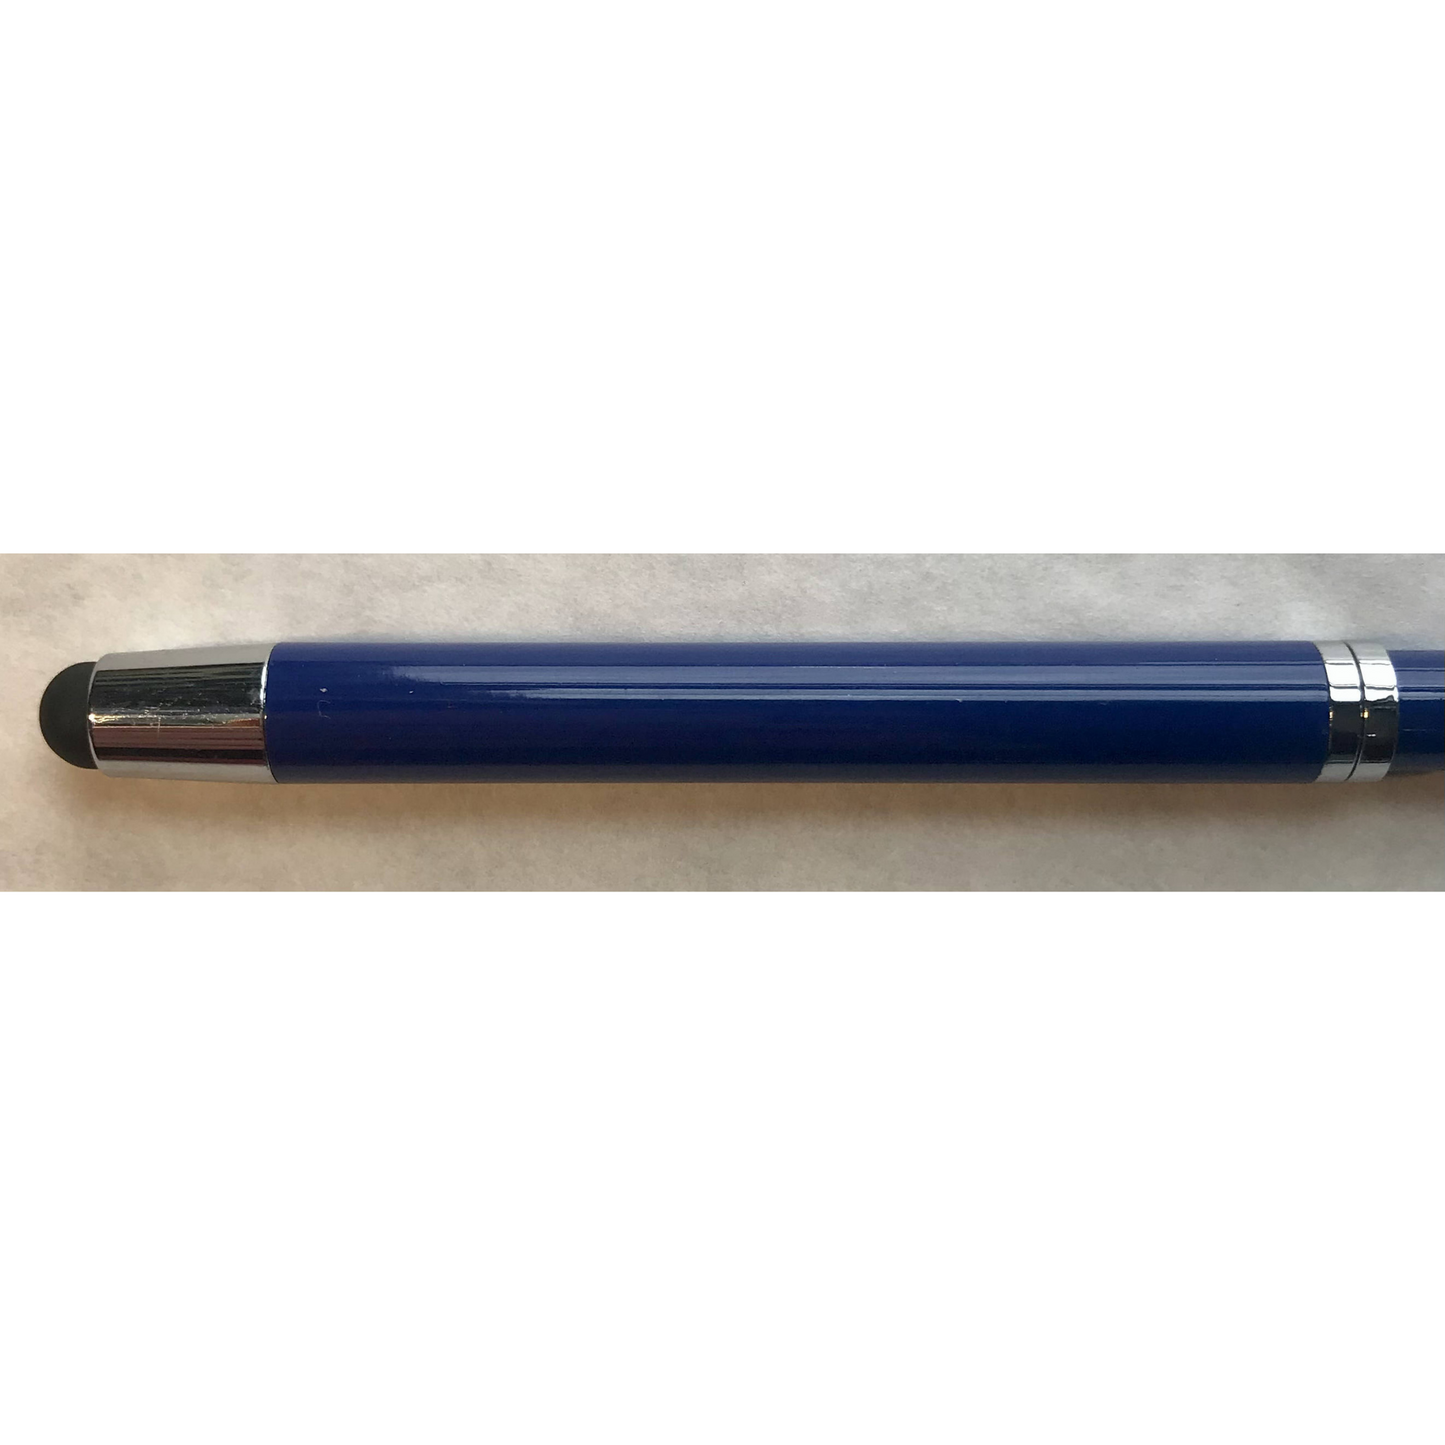 Extender Pen with Stylus